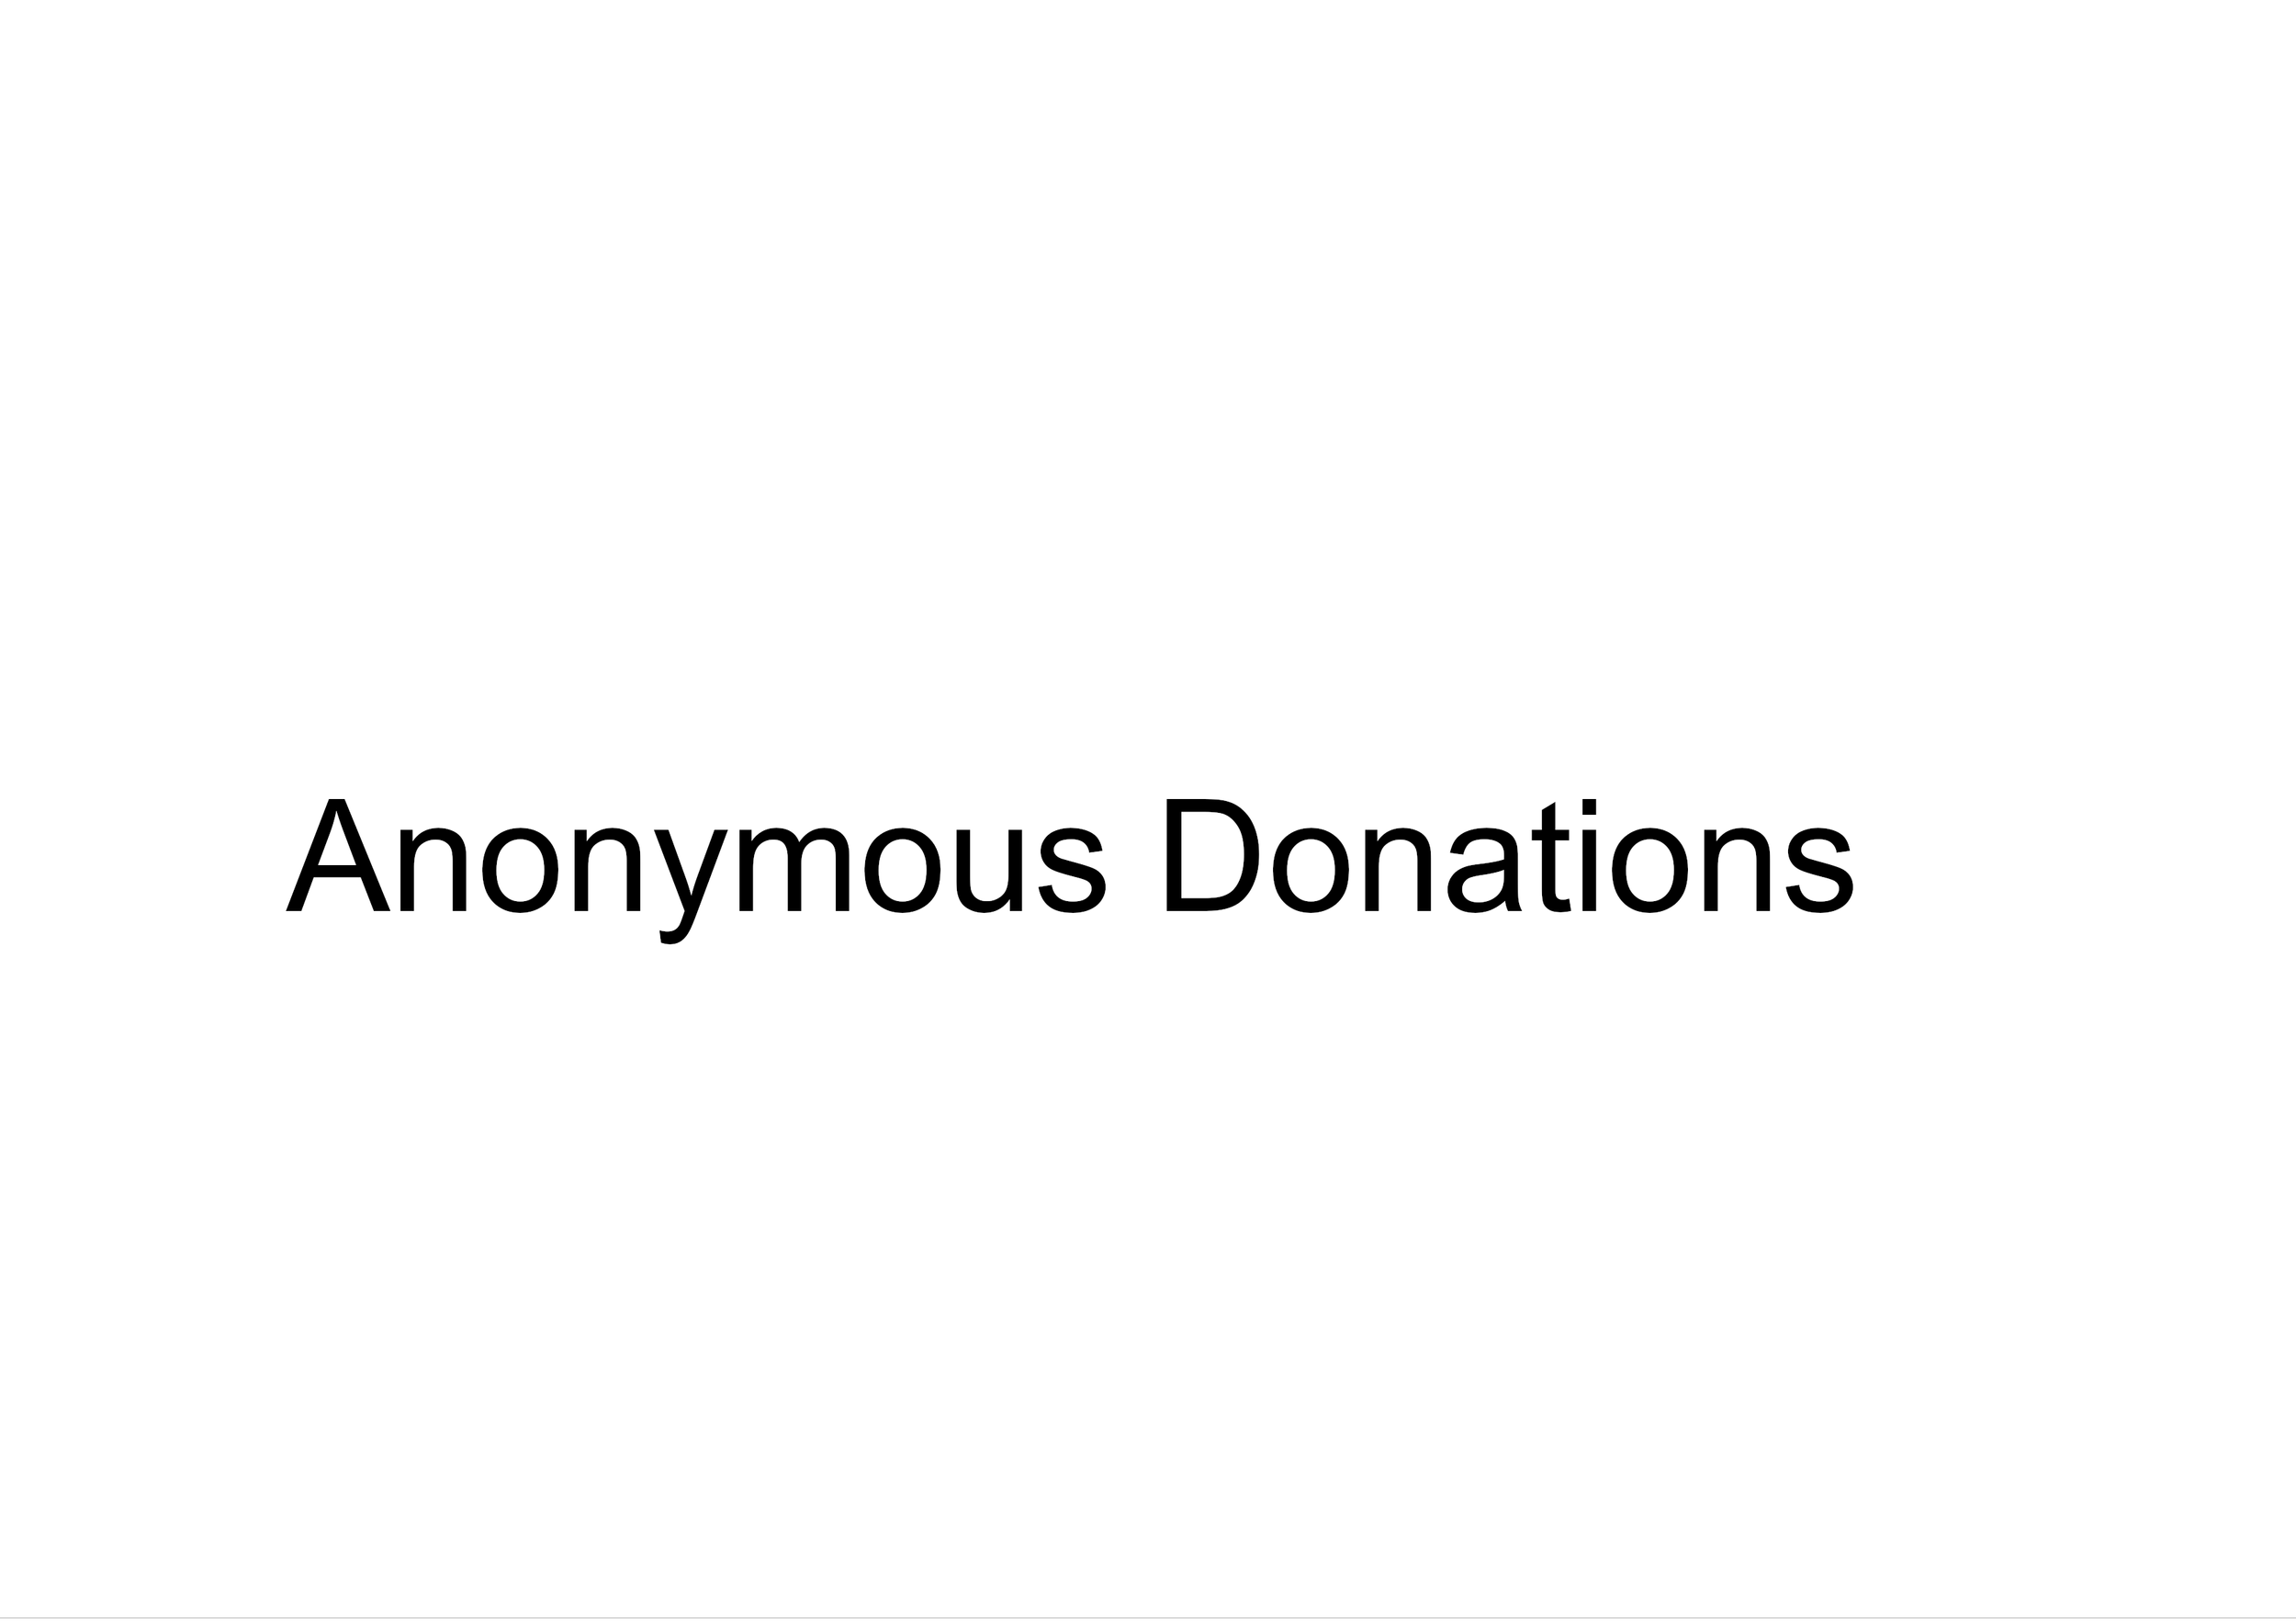 Anonymous donations for the website.png